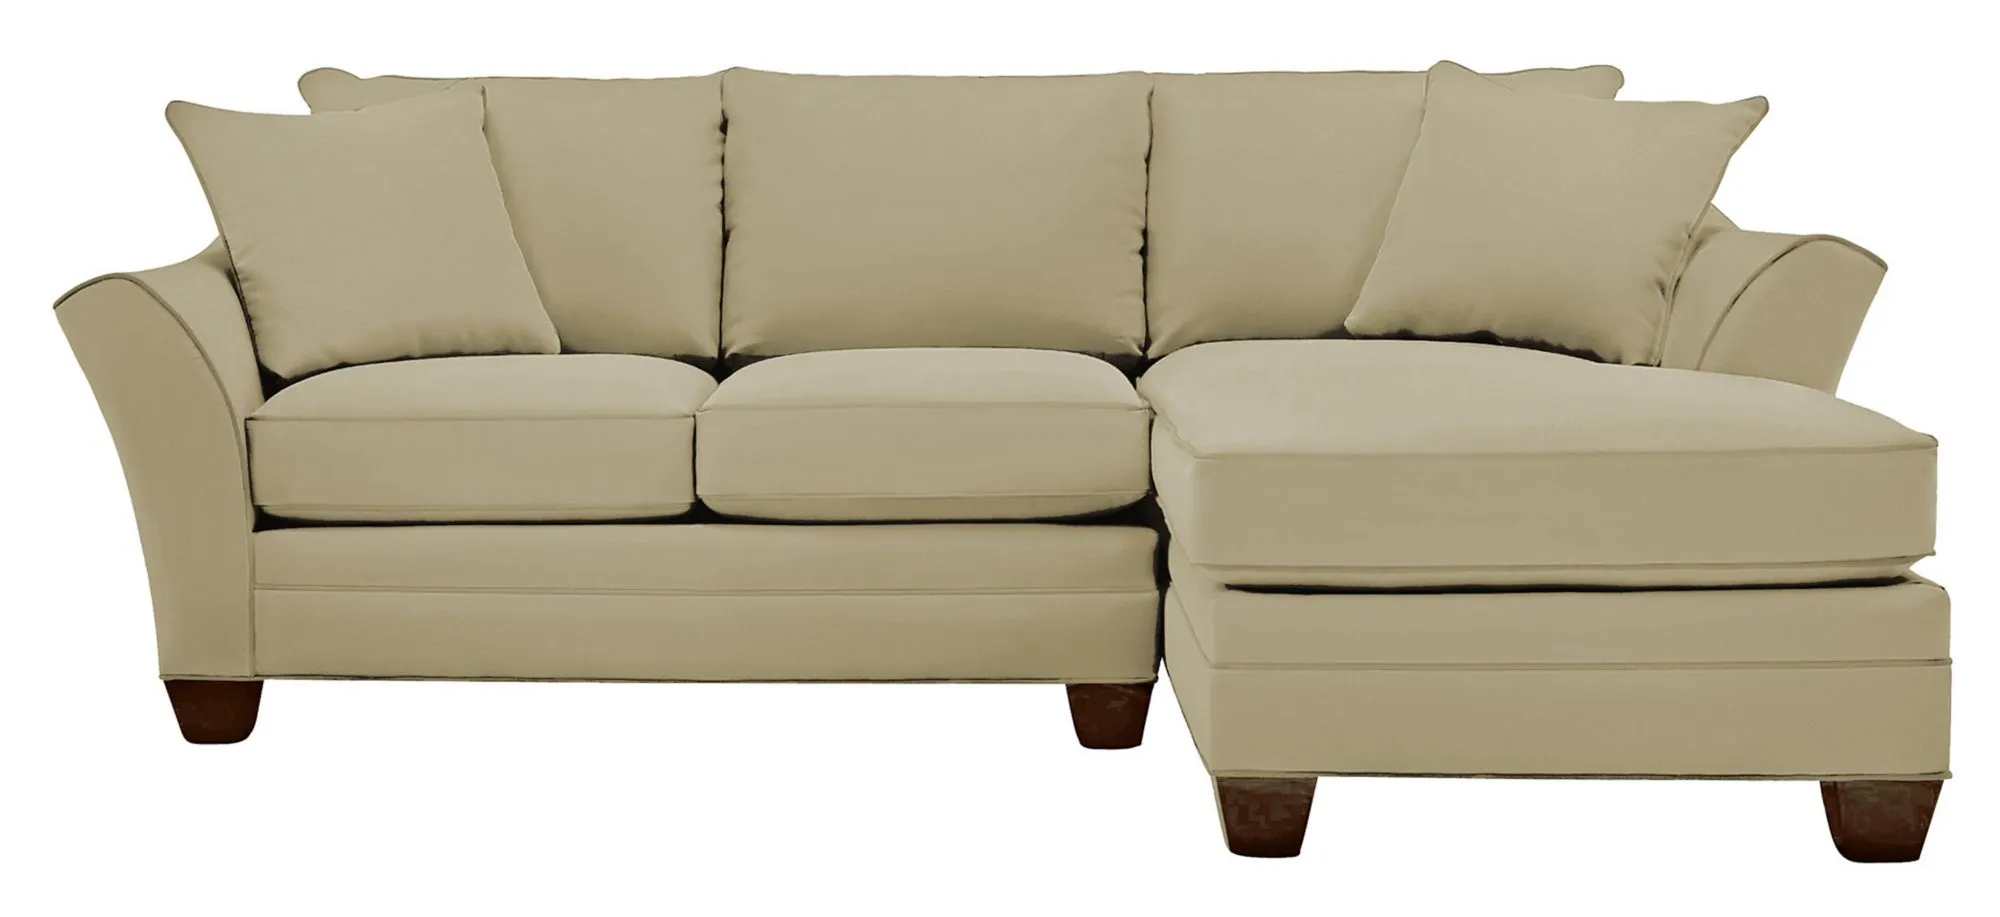 Foresthill 2-pc. Right Hand Chaise Sectional Sofa in Suede So Soft Vanilla by H.M. Richards